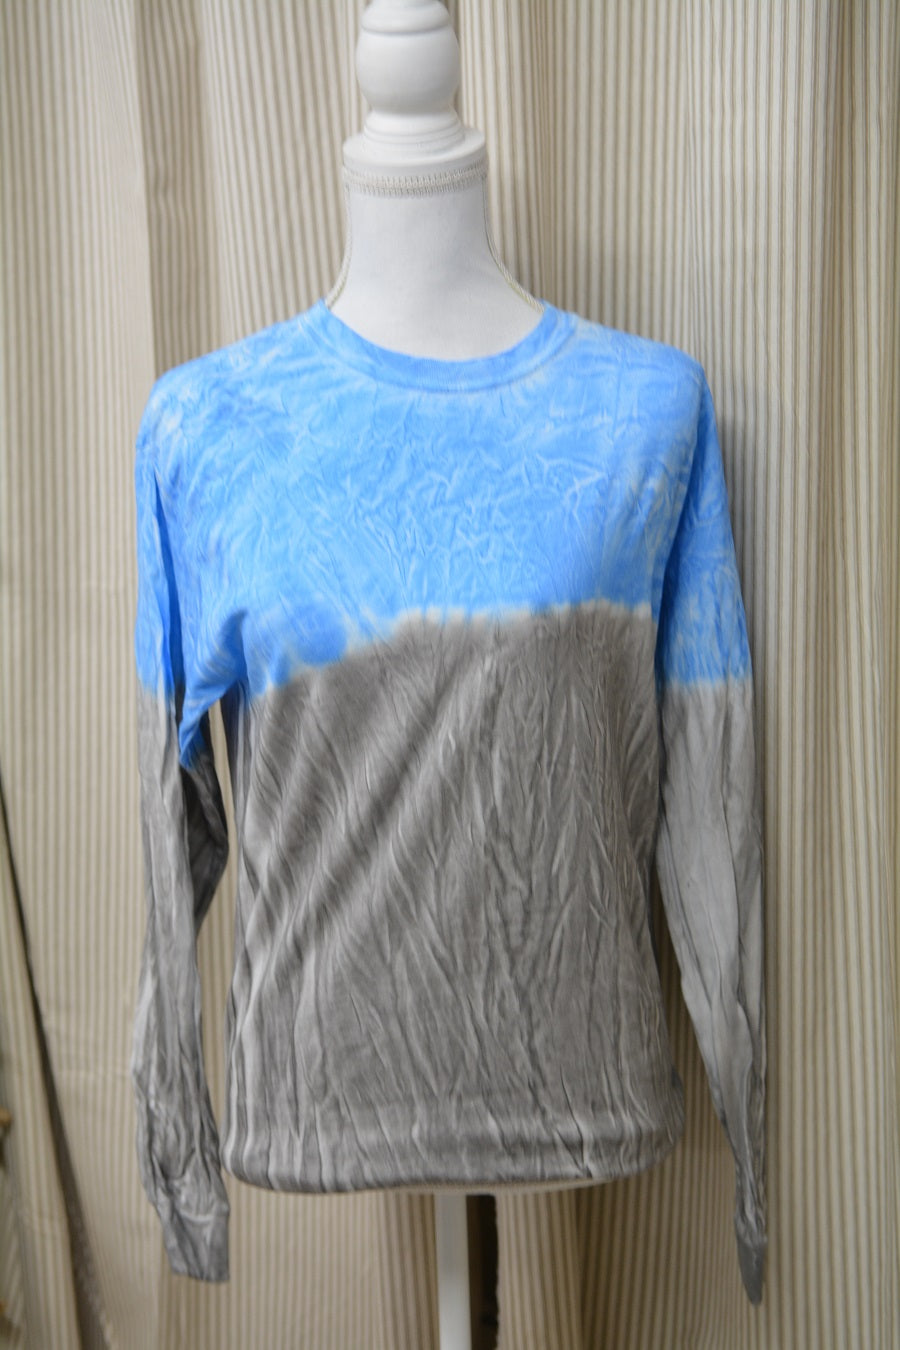 KENTUCKY INSPIRED SHIRTS AND GIFTS Tie Dye Long Sleeve